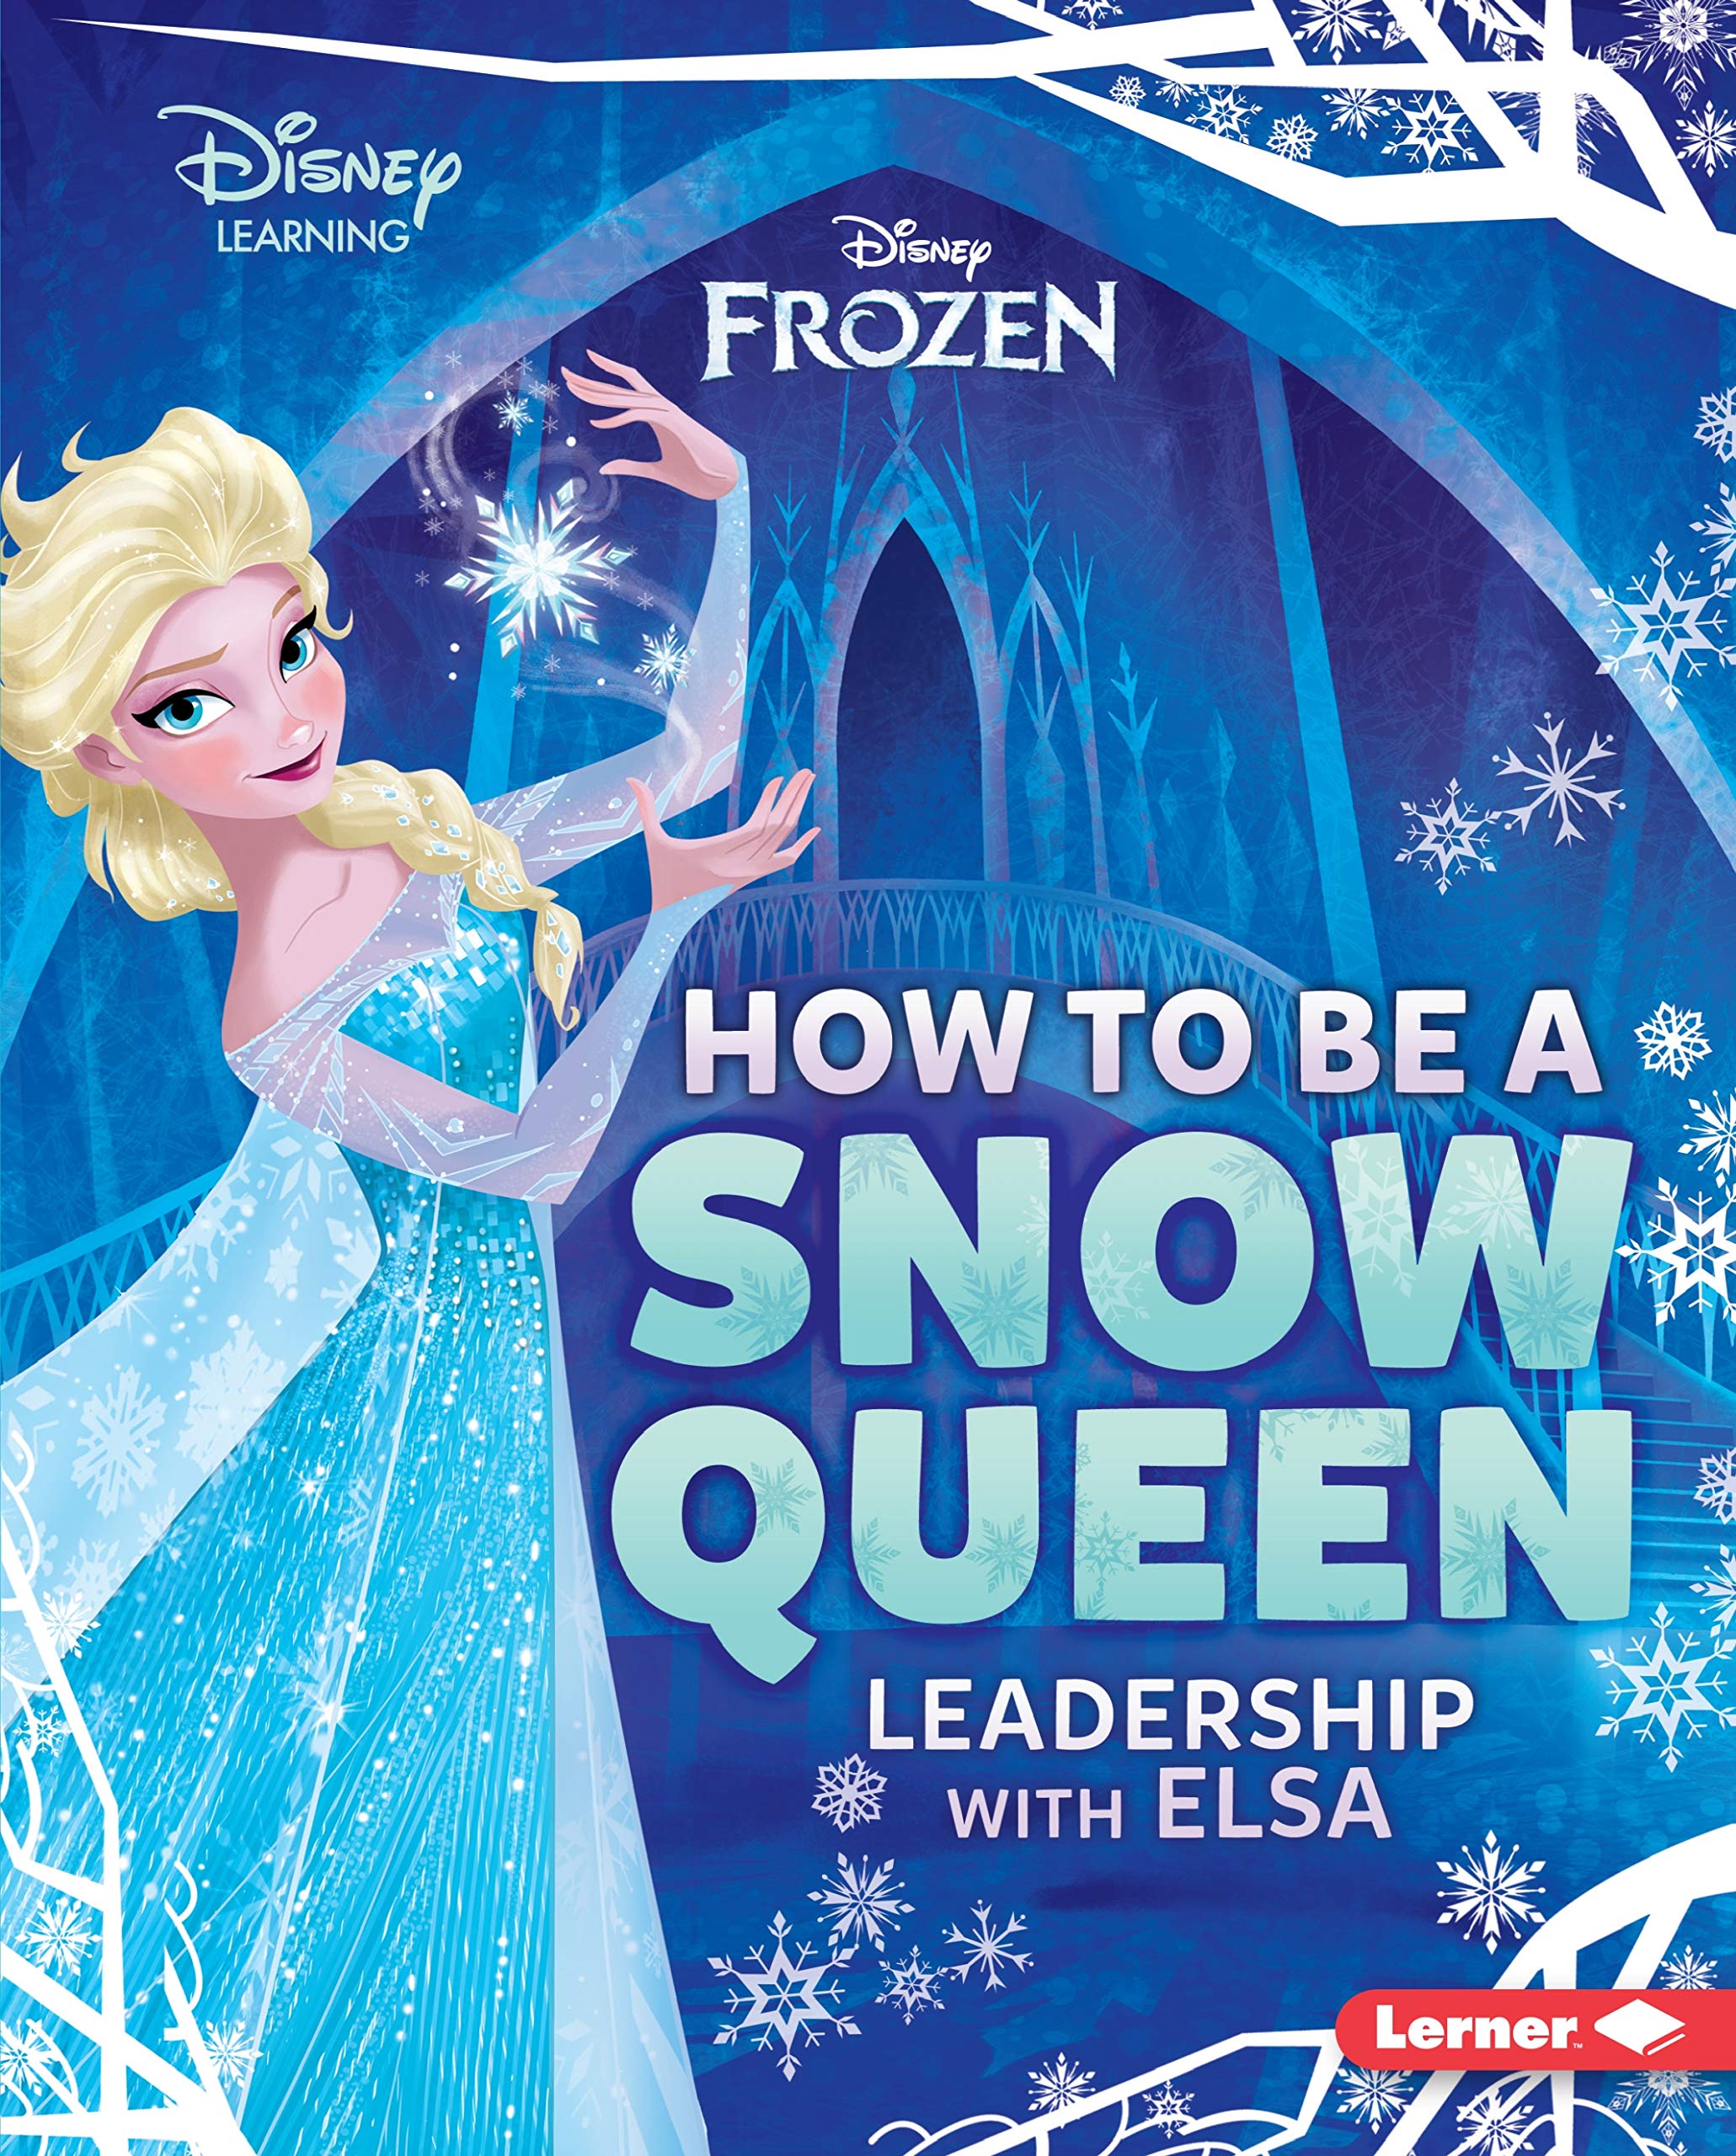 Lerner-Disney-Learning-How-to-be-a-Snow-Queen-by-Mari-Schuh